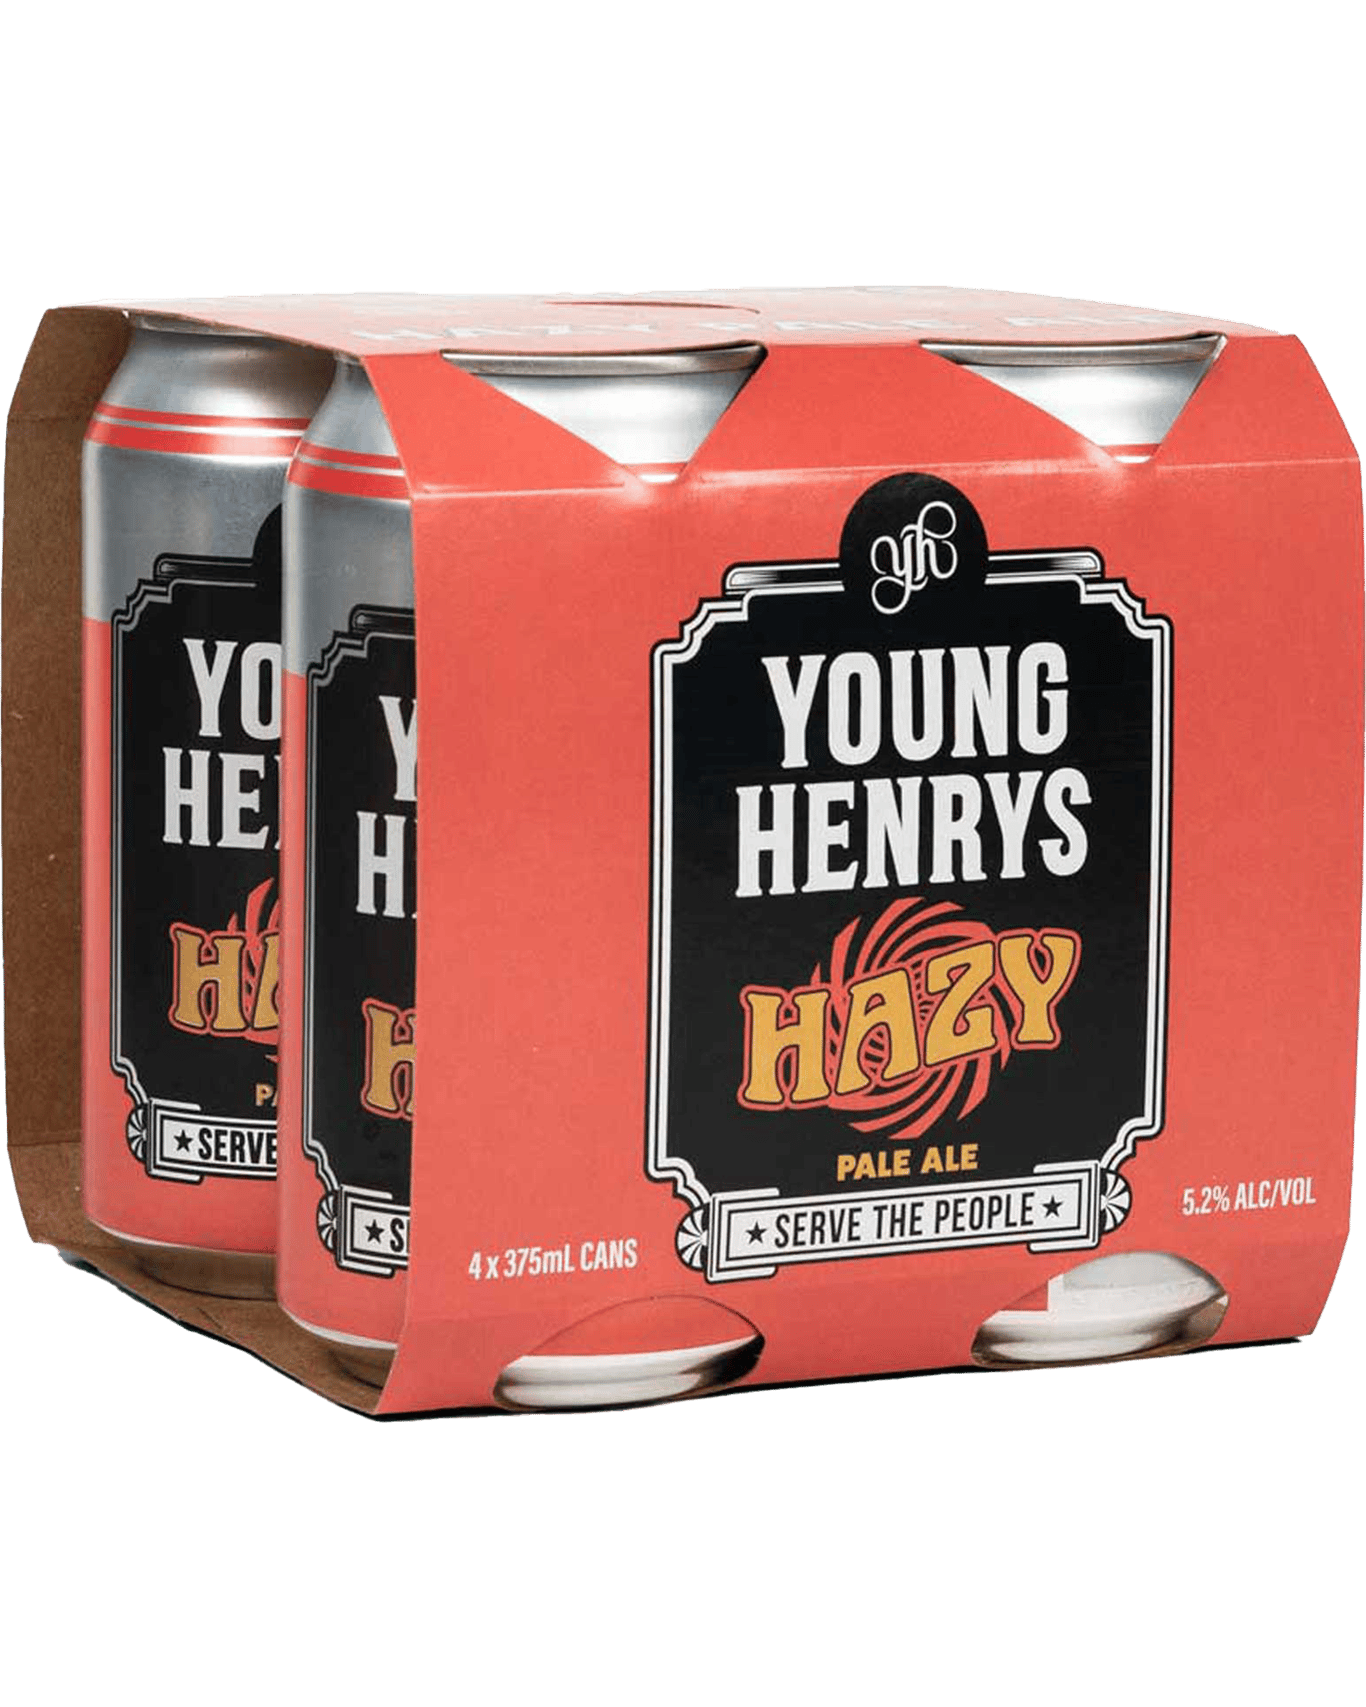 Young Henrys Hazy Pale Ale 375ml Can 4 Pack